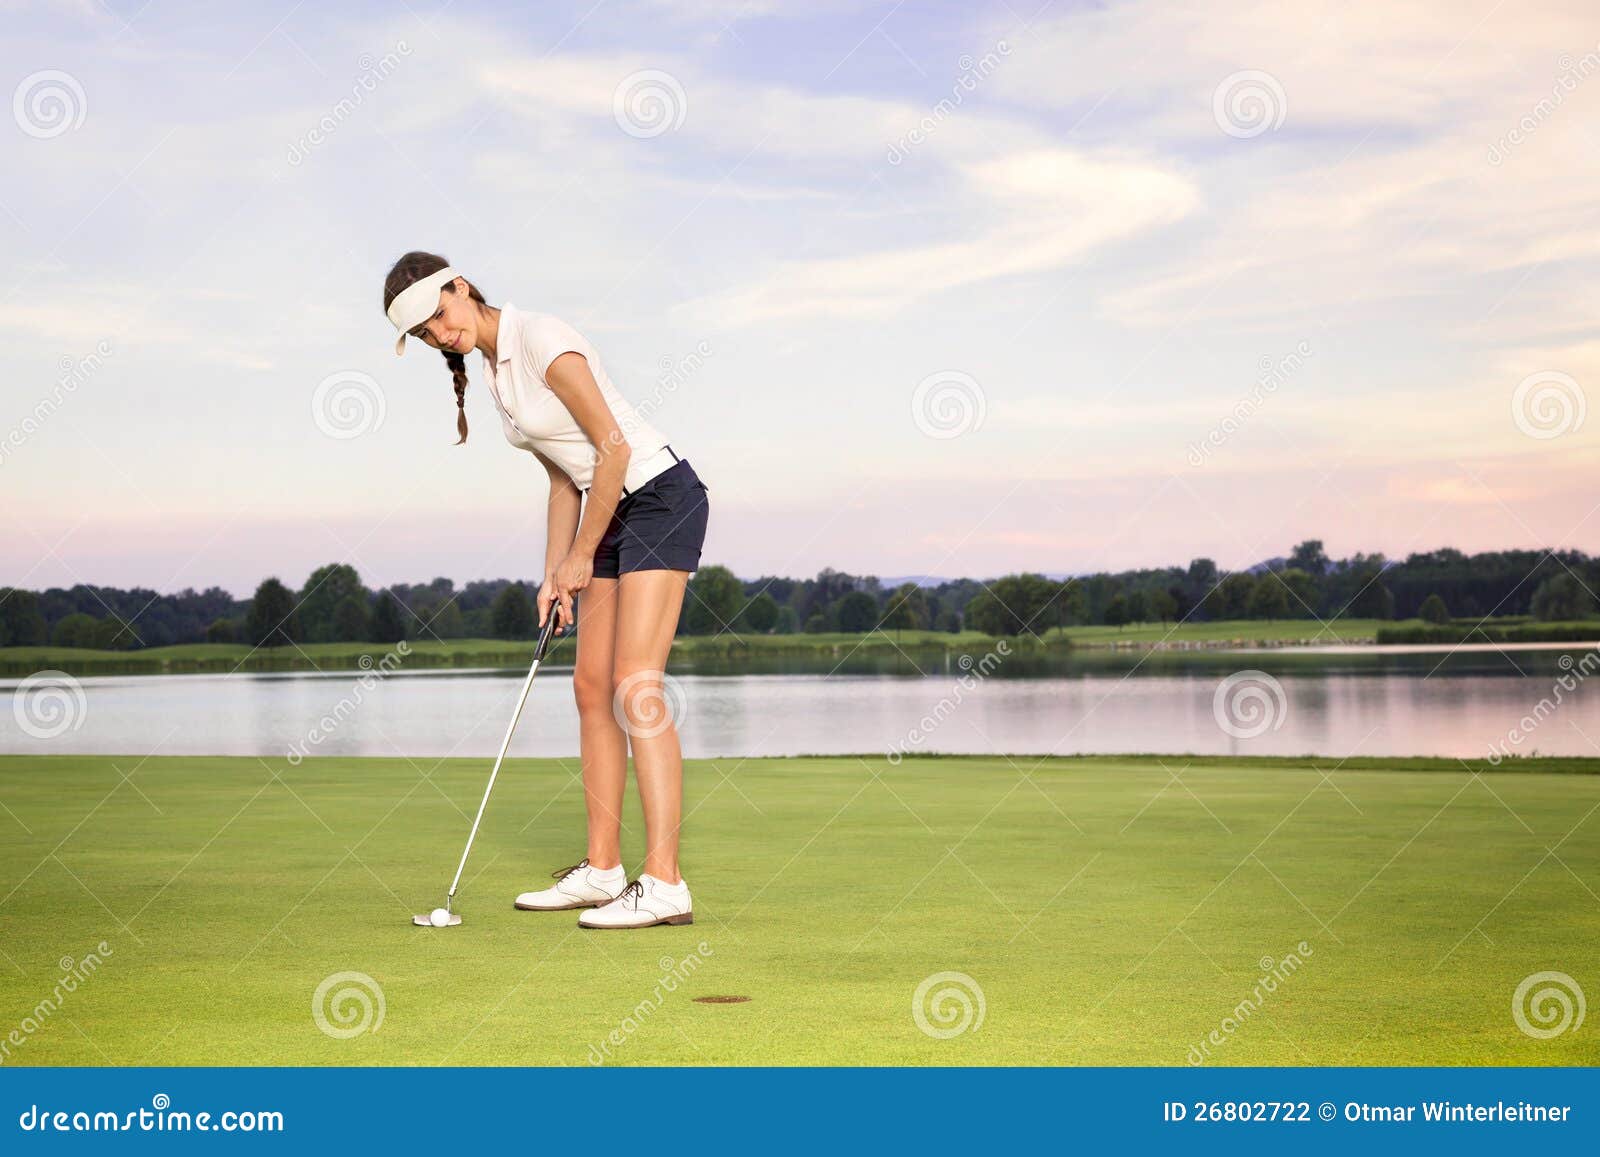 Girl Golfer Putting Stock Photography Image 26802722 throughout Awesome along with Beautiful golfing girl with regard to Home